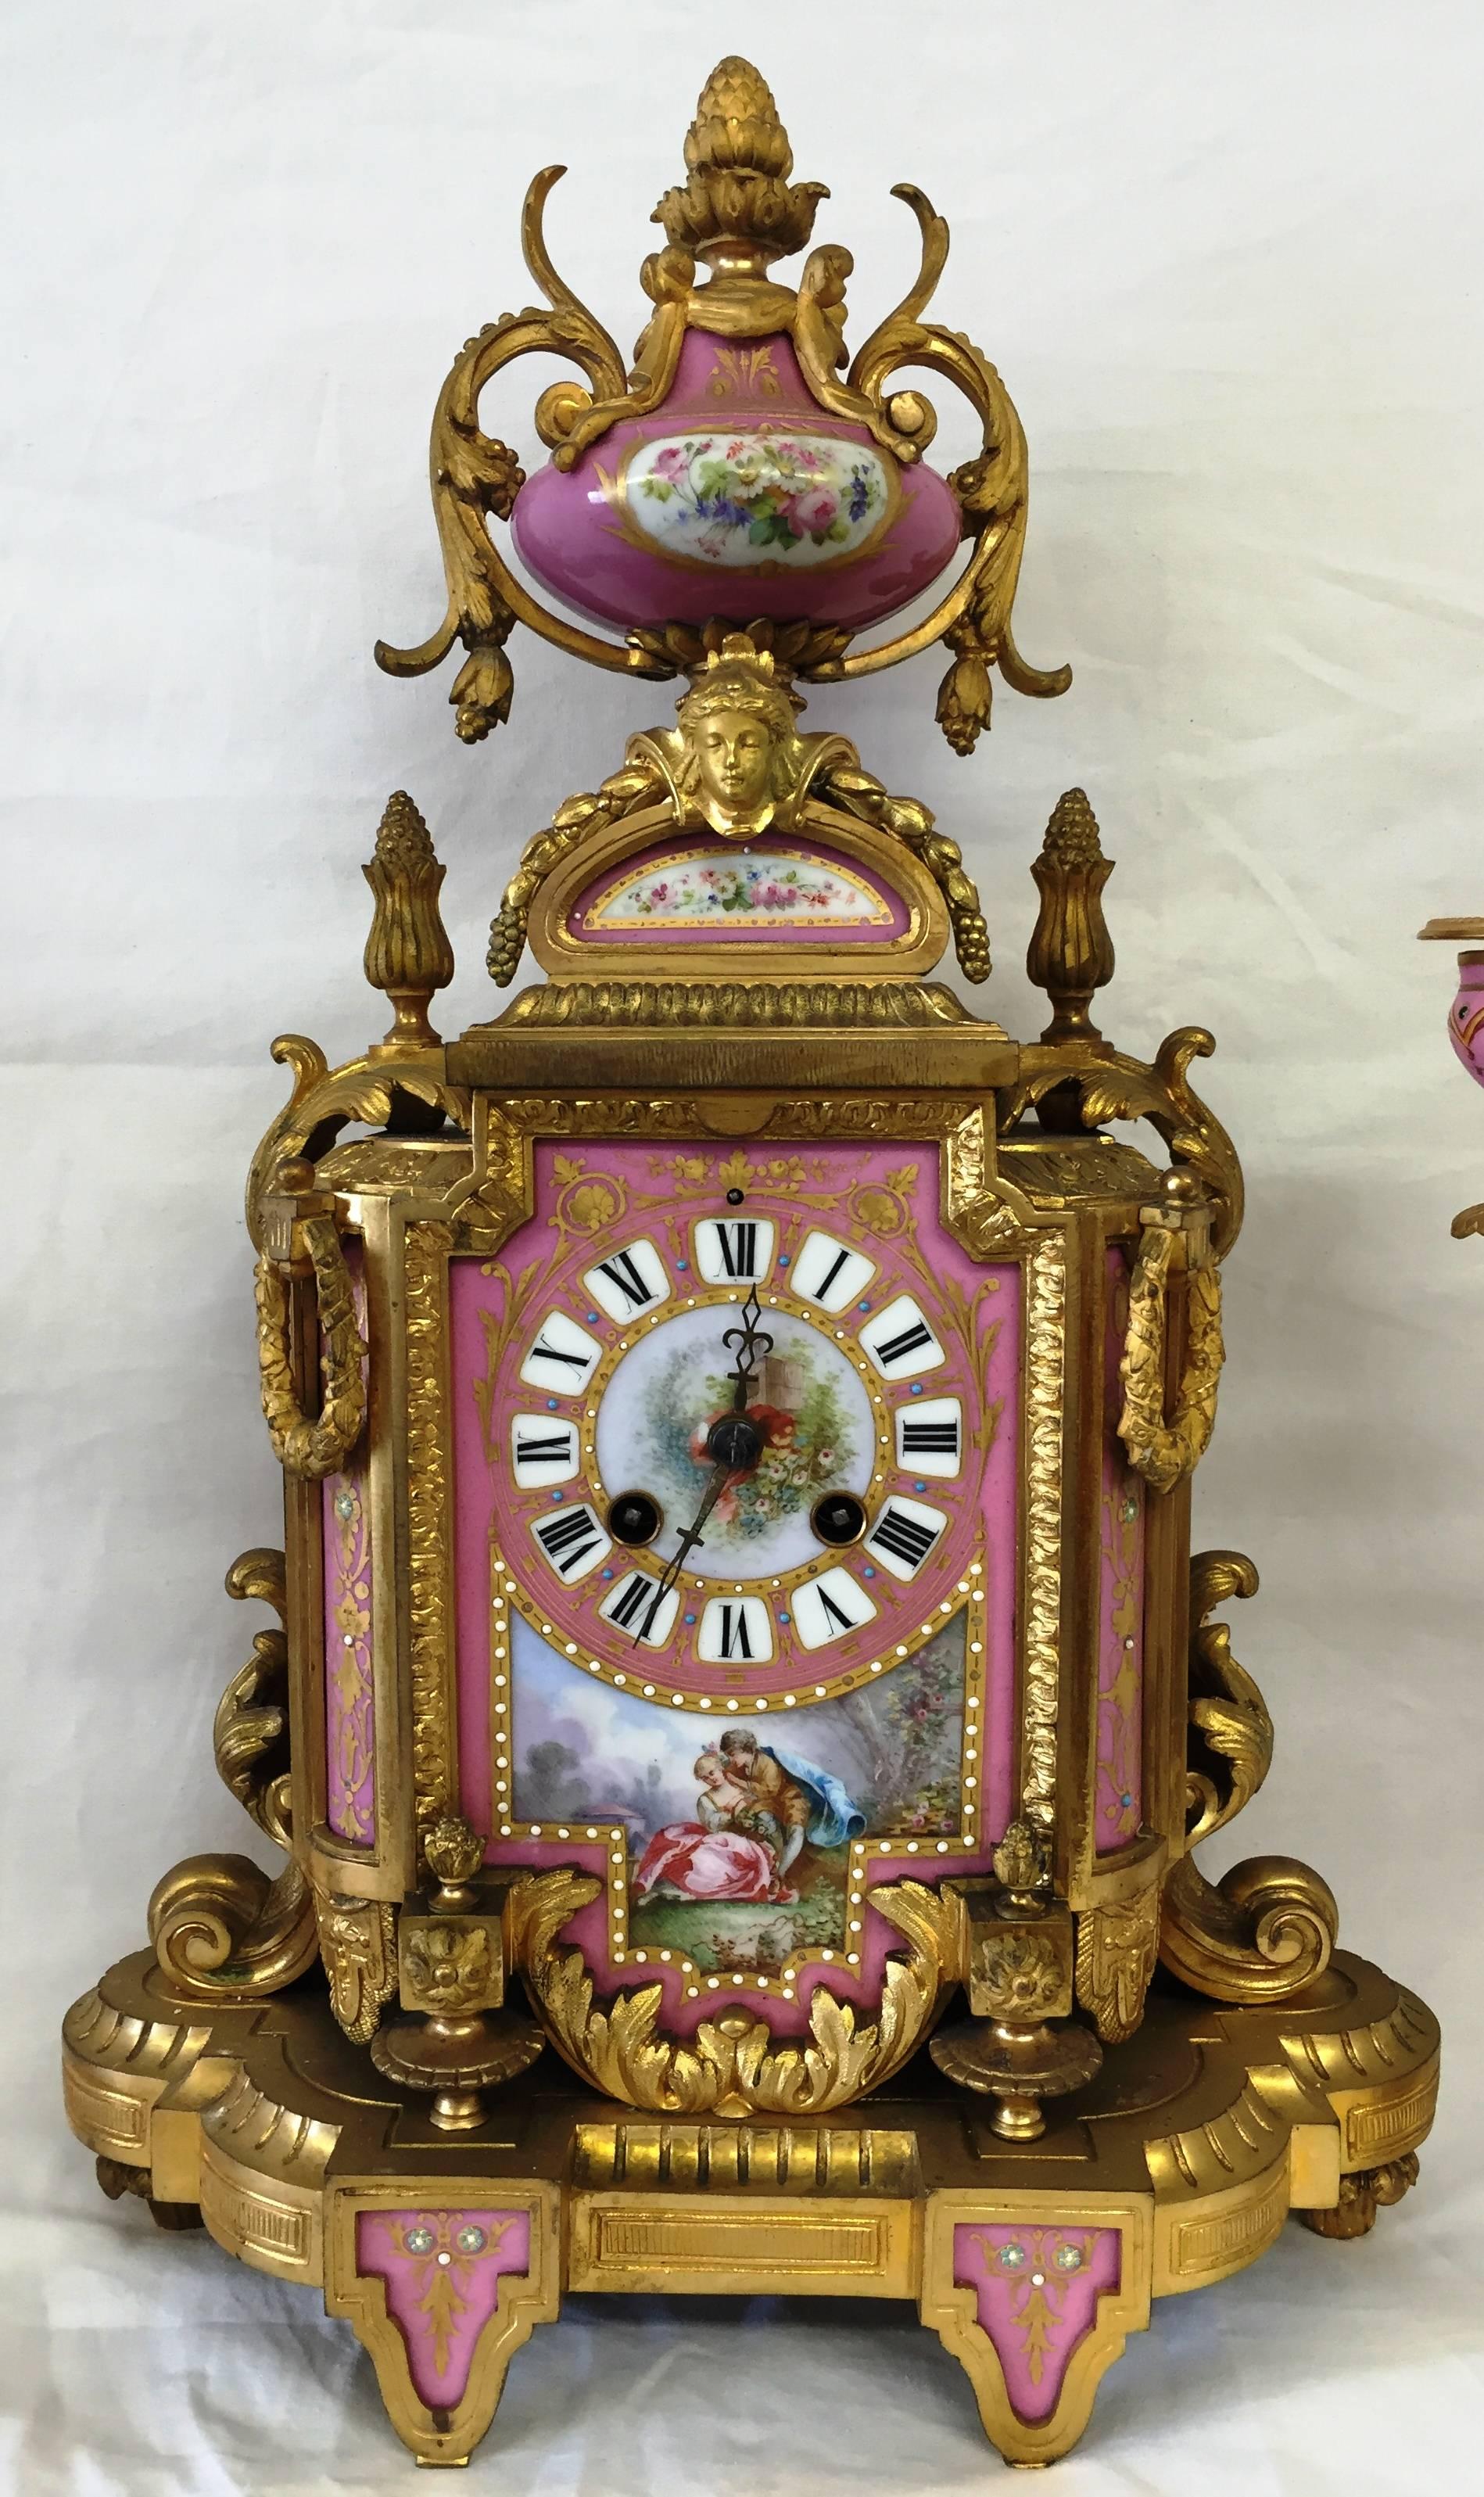 A good quality French, 19th century pink sevres porcelain and gilded ormolu clock set. Having a classical urn to the top, an eight day chiming movement. A romantic scene painted to the central panel and a pair of two branch candelabra on either side.